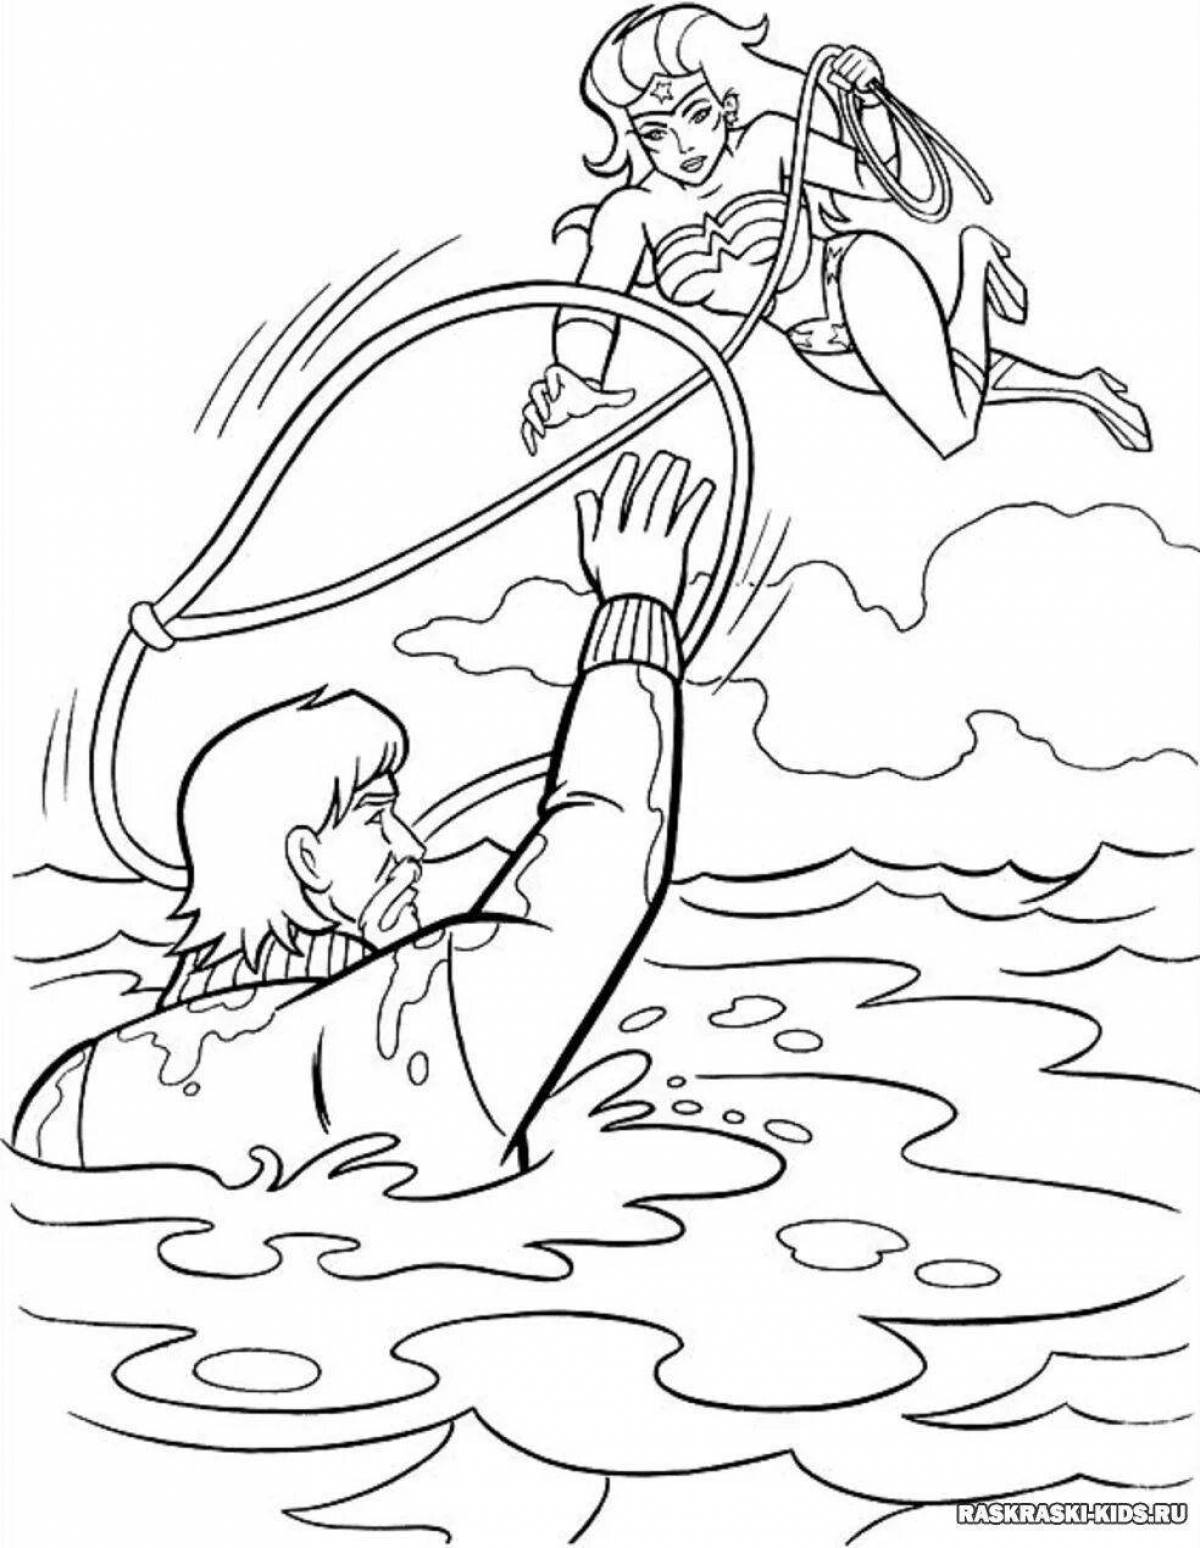 Attractive water safety coloring page